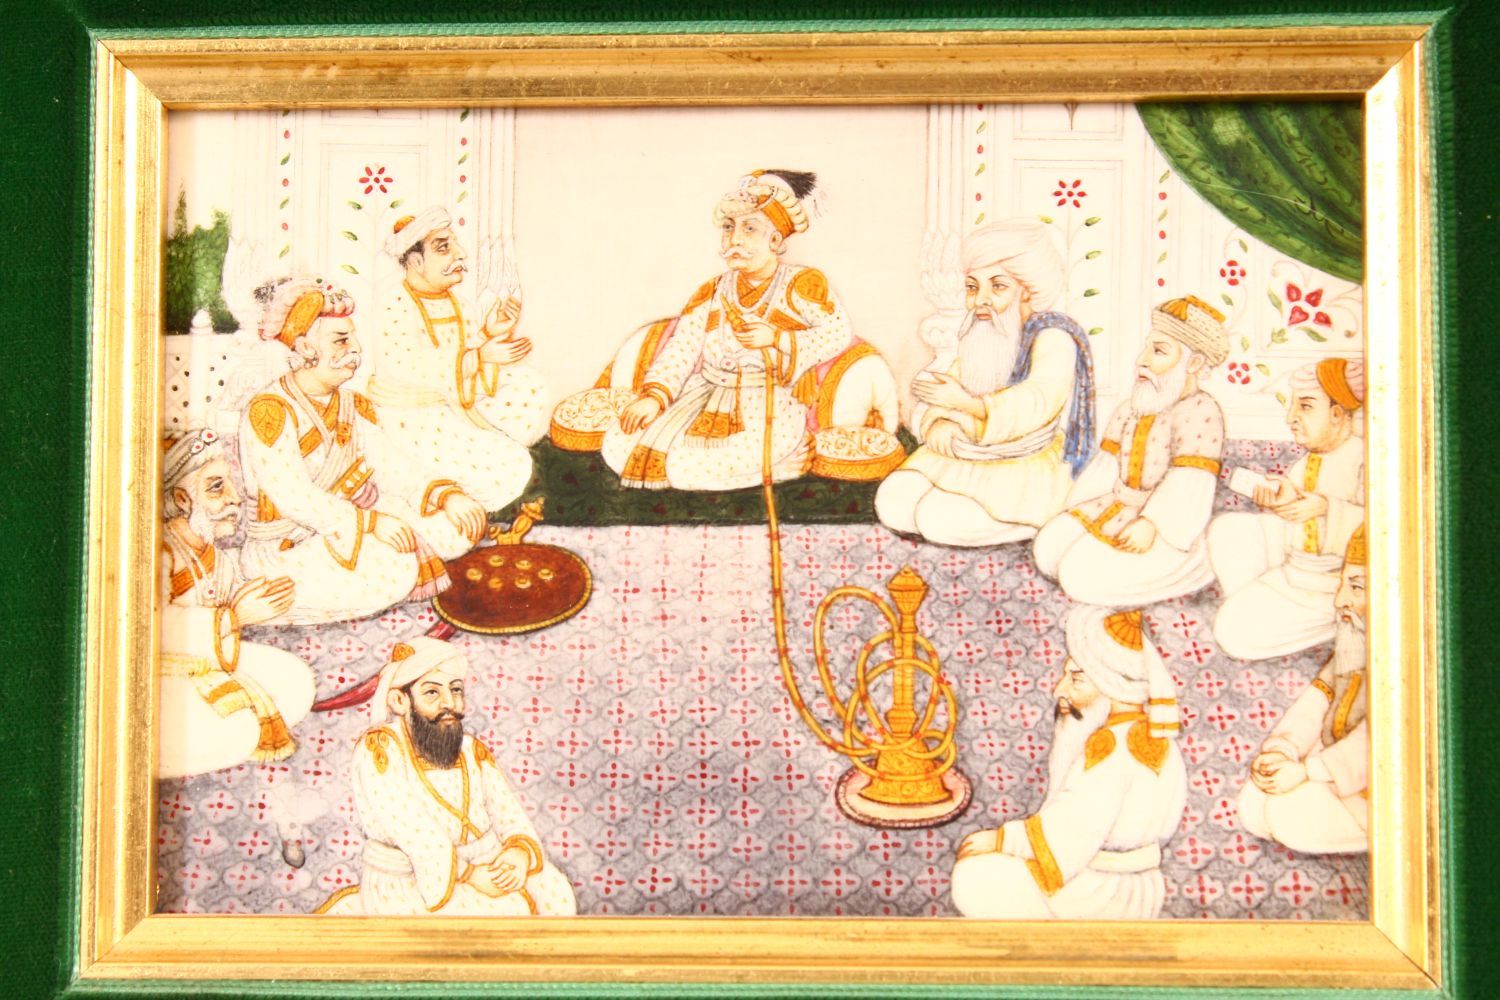 AN INDIAN MINIATURE PAINTING ON BONE OR IVORY - depicting male figures seated around a pipe - framed - Image 2 of 3